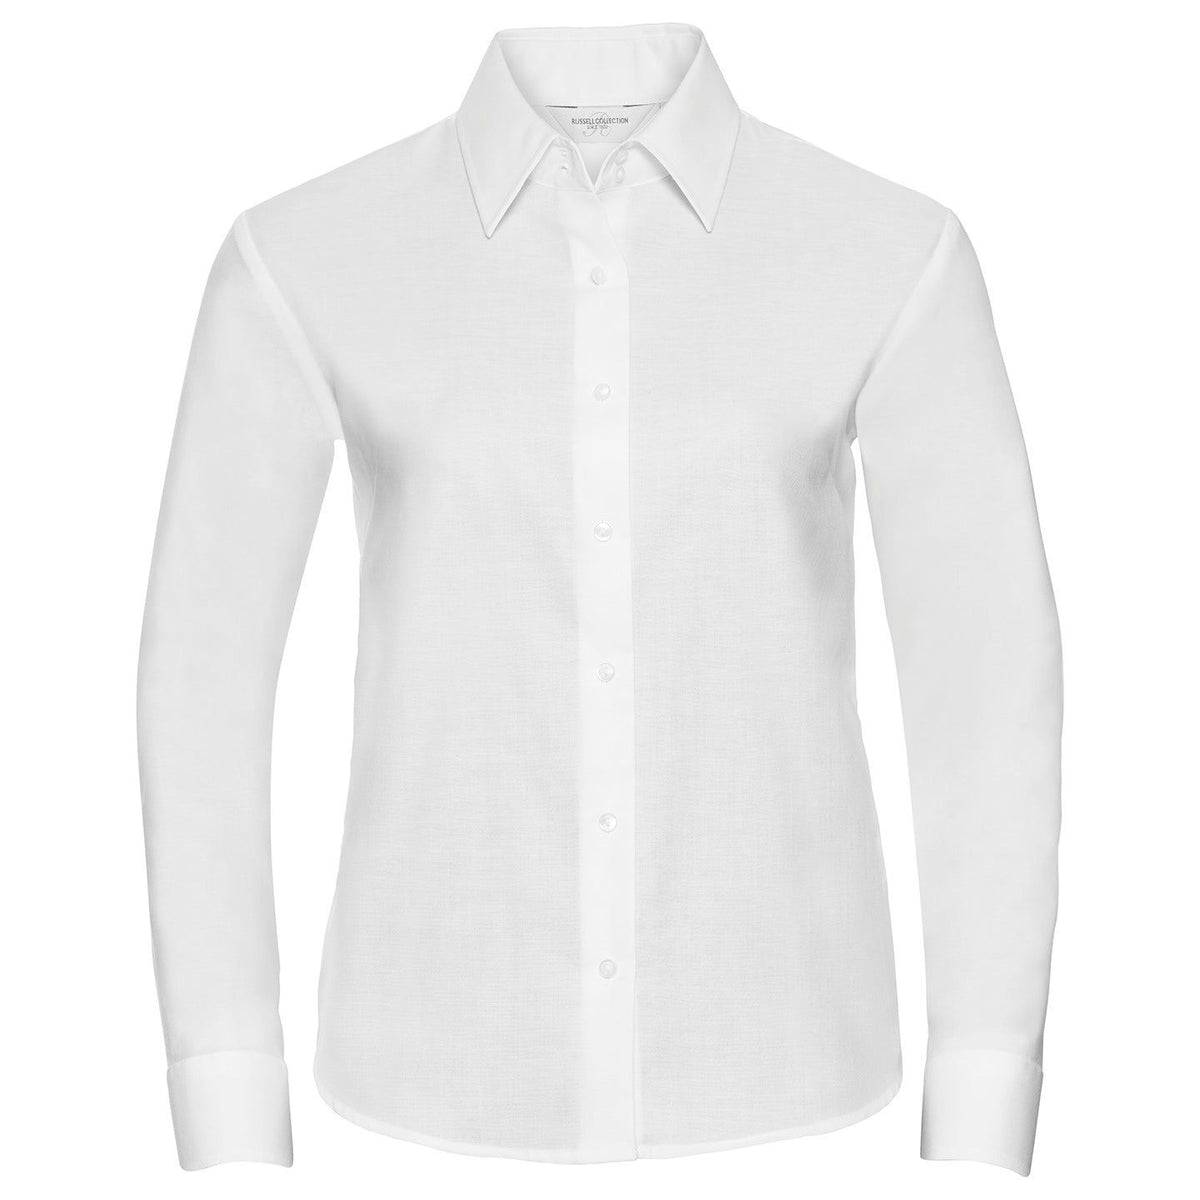 Russell Womens Long Sleeve Easy-Care Oxford Shirt